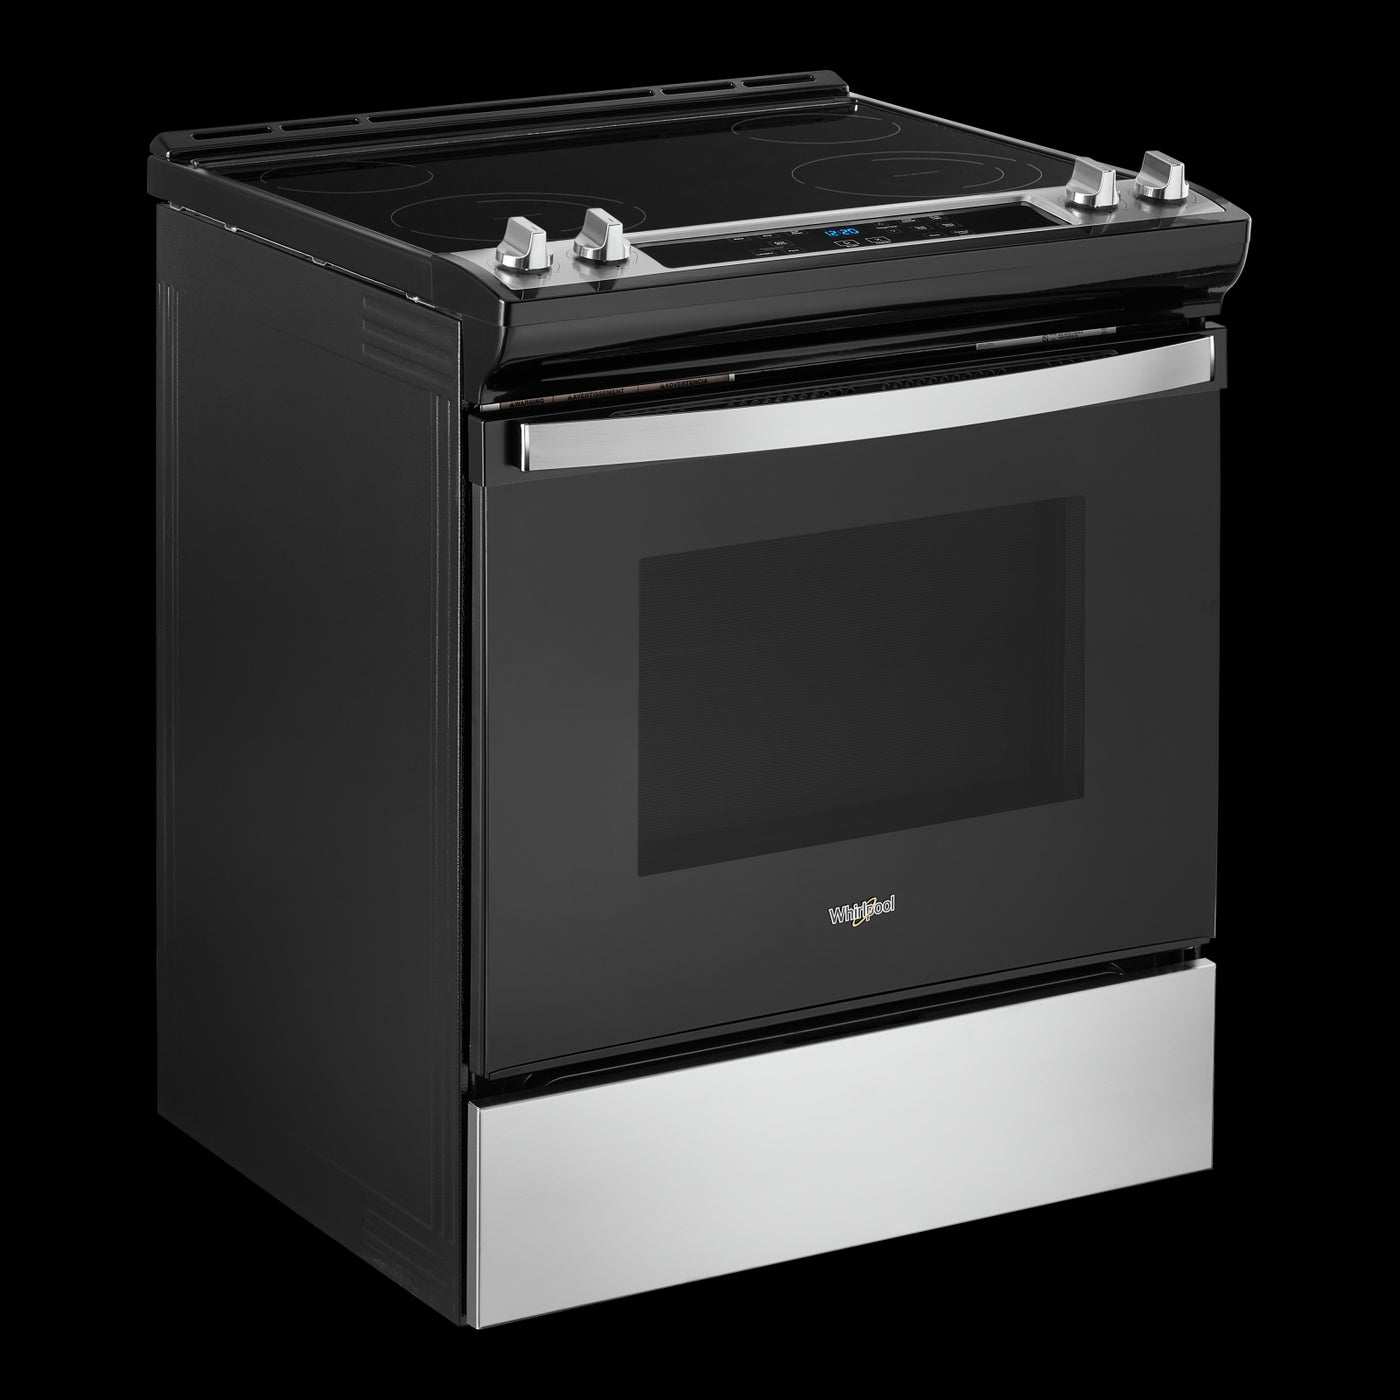 Whirlpool Stainless Steel Electric Range with Frozen Bake Technology (4.8 Cu.Ft) - YWEE515S0LS